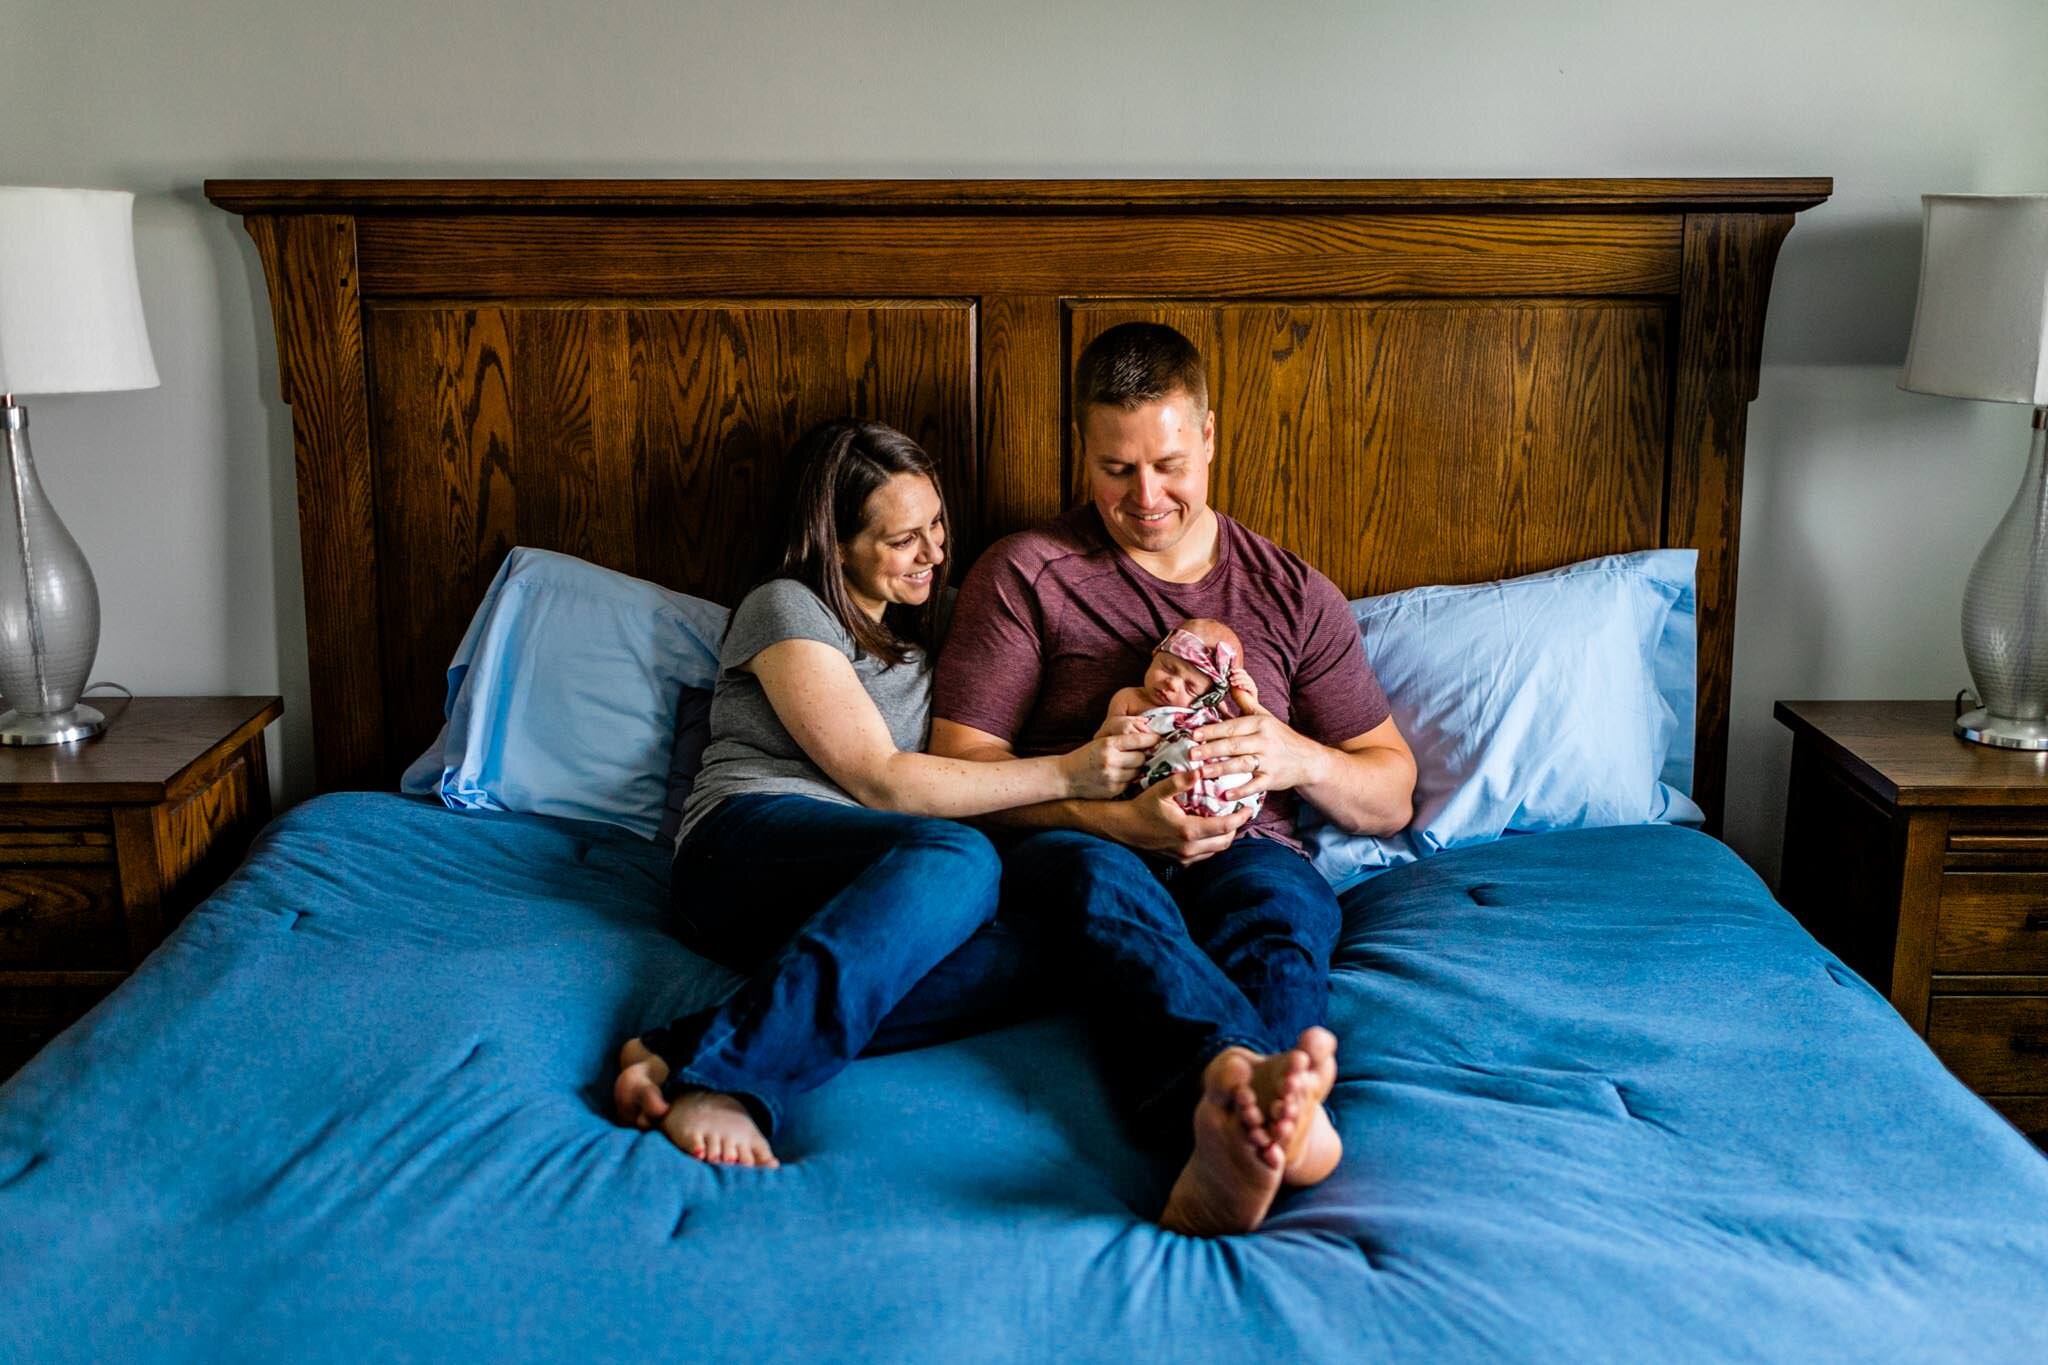 Hillsborough Newborn Photographer | By G. Lin Photography | Lifestyle newborn photo of parents holding baby in bedroom